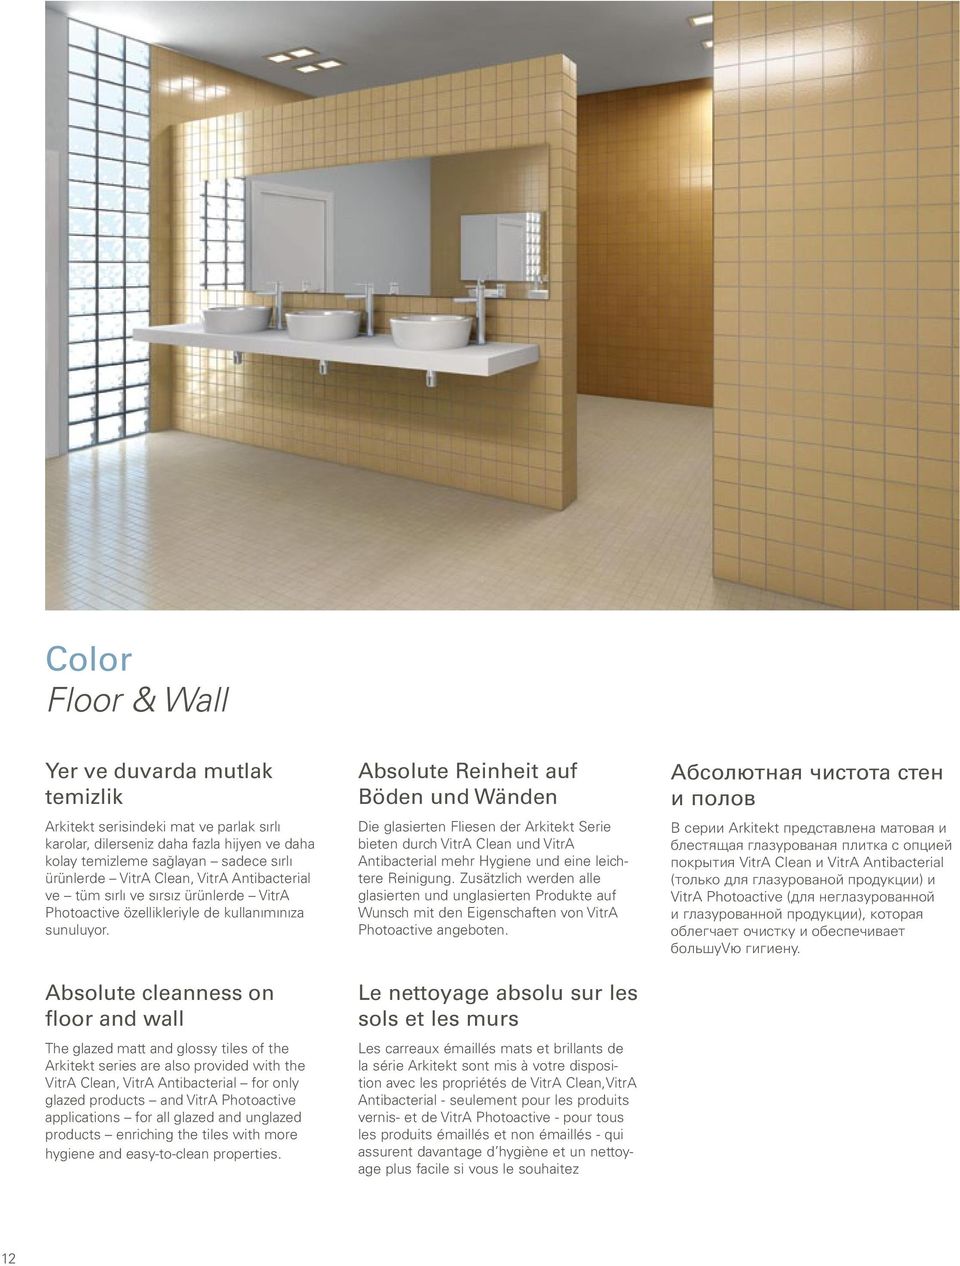 Absolute cleanness on floor and wall The glazed matt and glossy tiles of the Arkitekt series are also provided with the VitrA Clean, VitrA Antibacterial for only glazed products and VitrA Photoactive